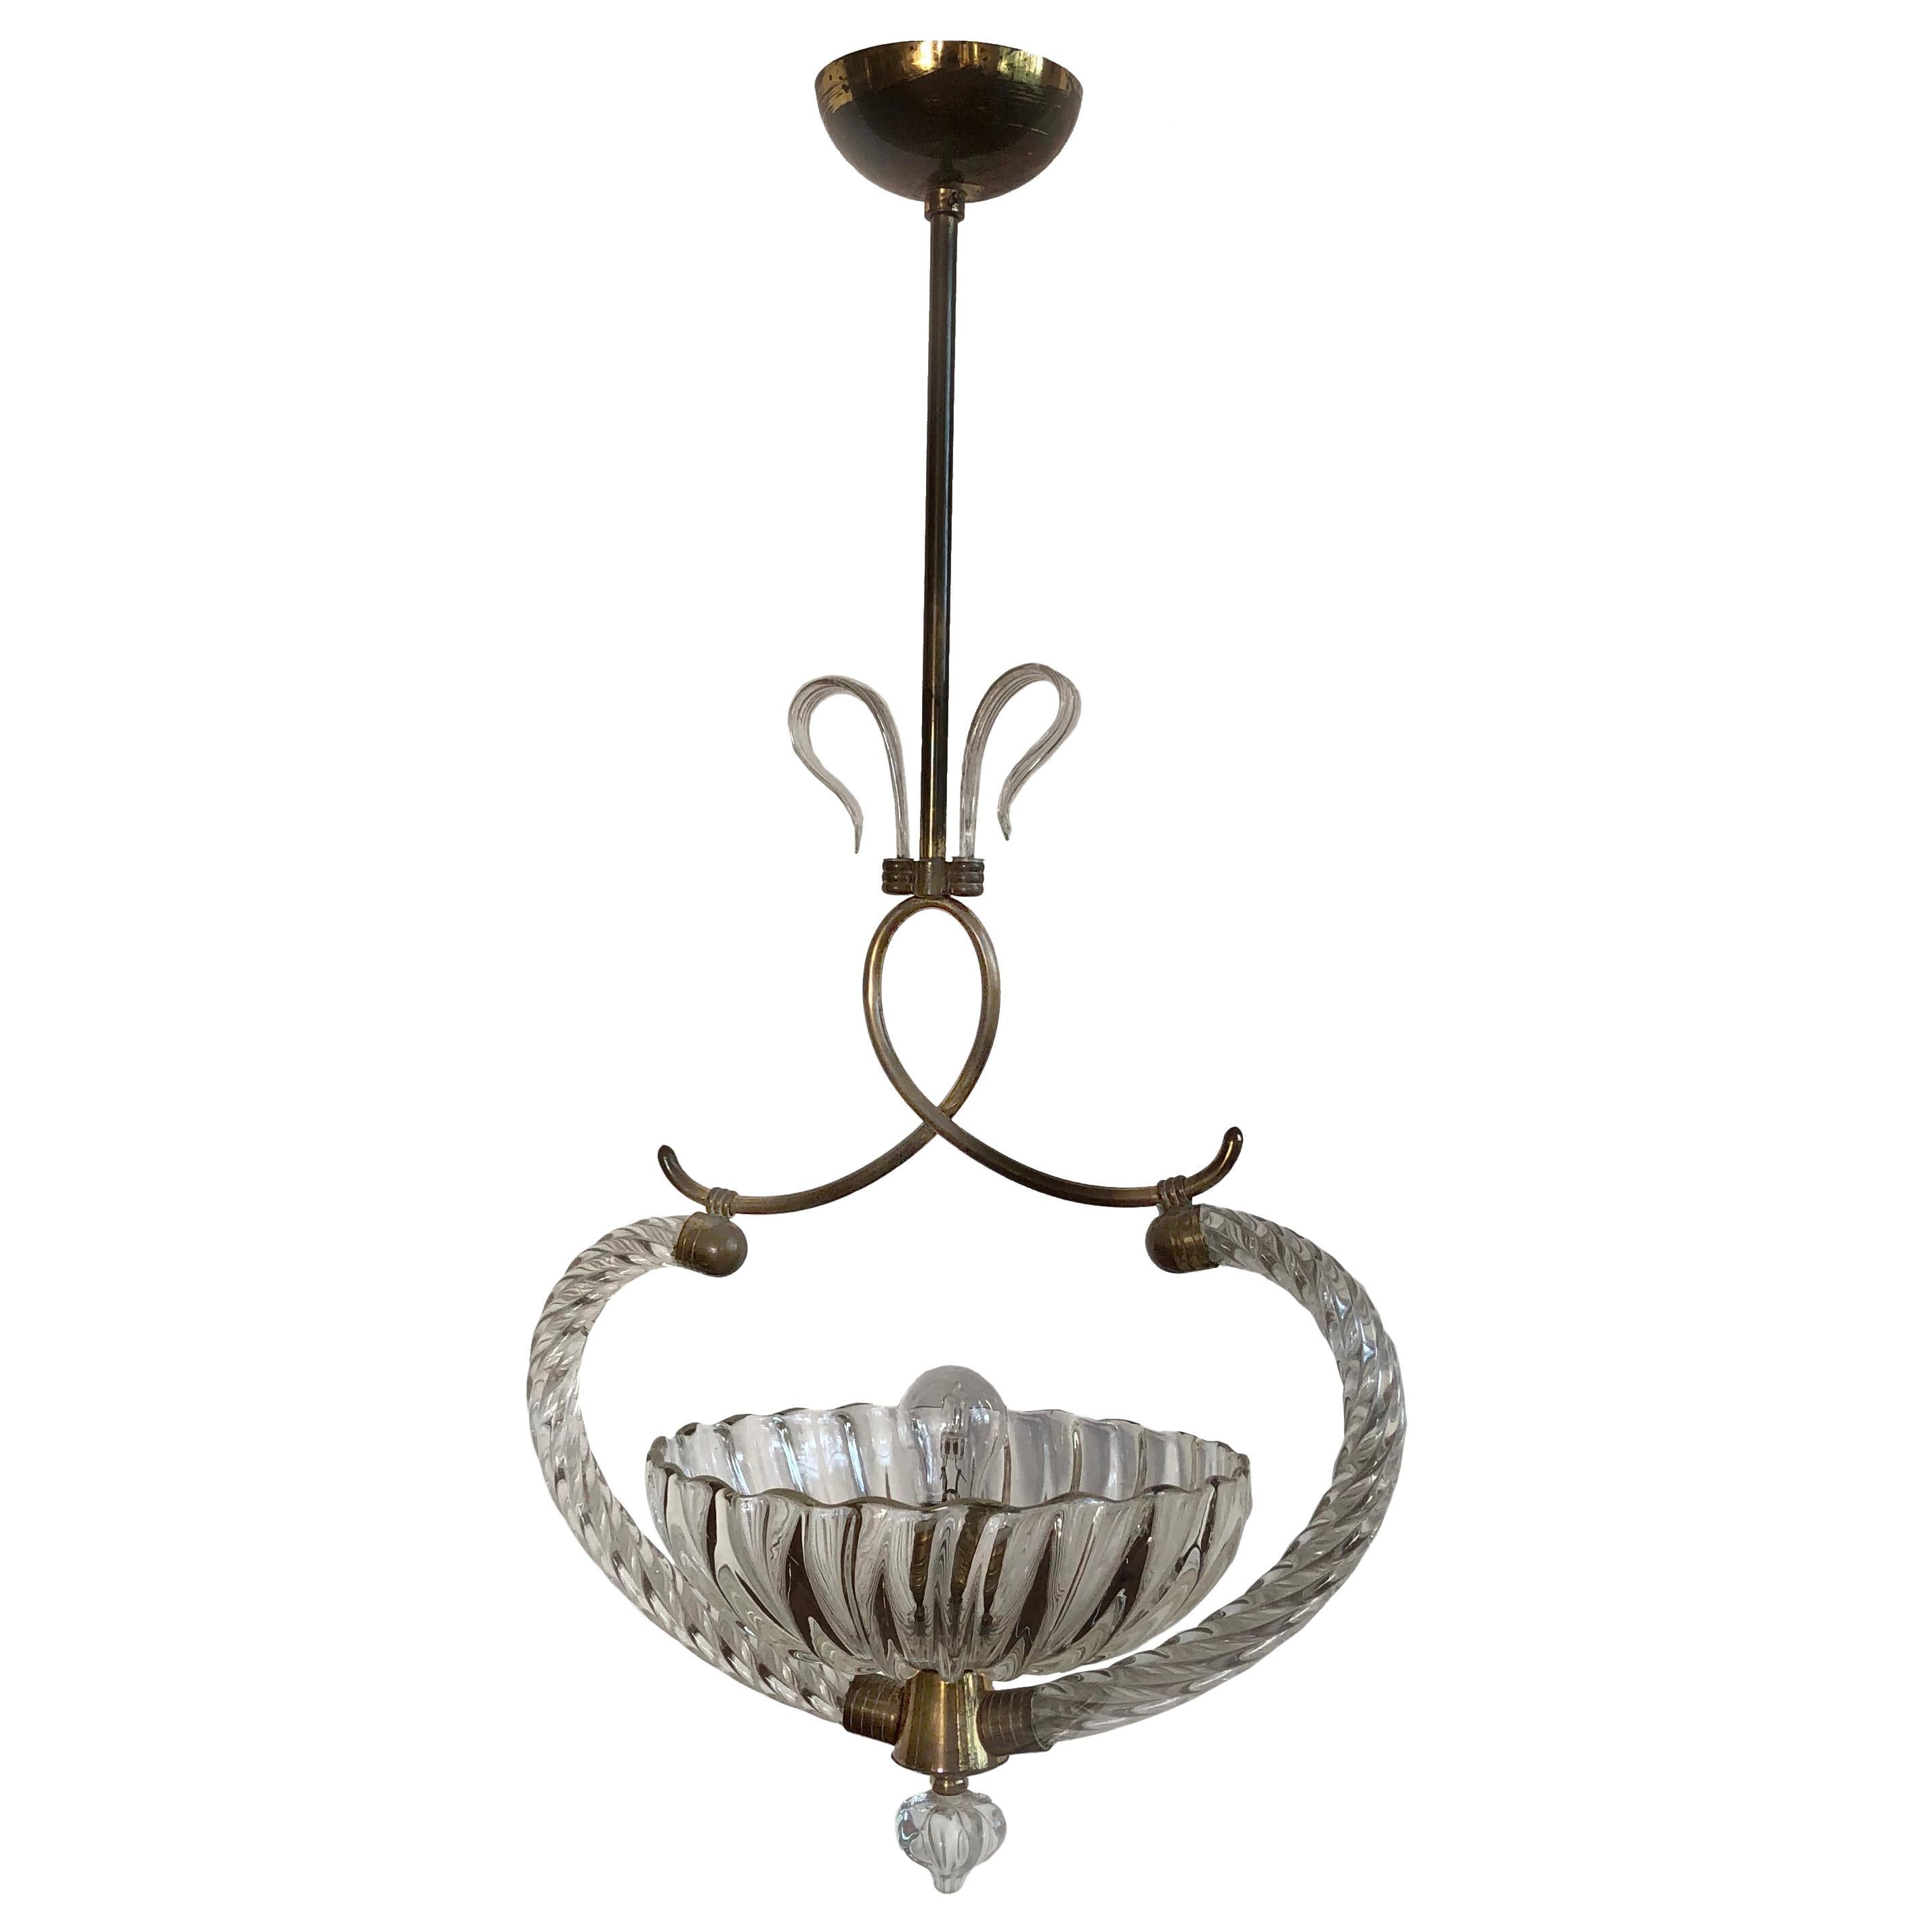 Ercole Barovier Murano Chandelier, Italy, 1940s For Sale